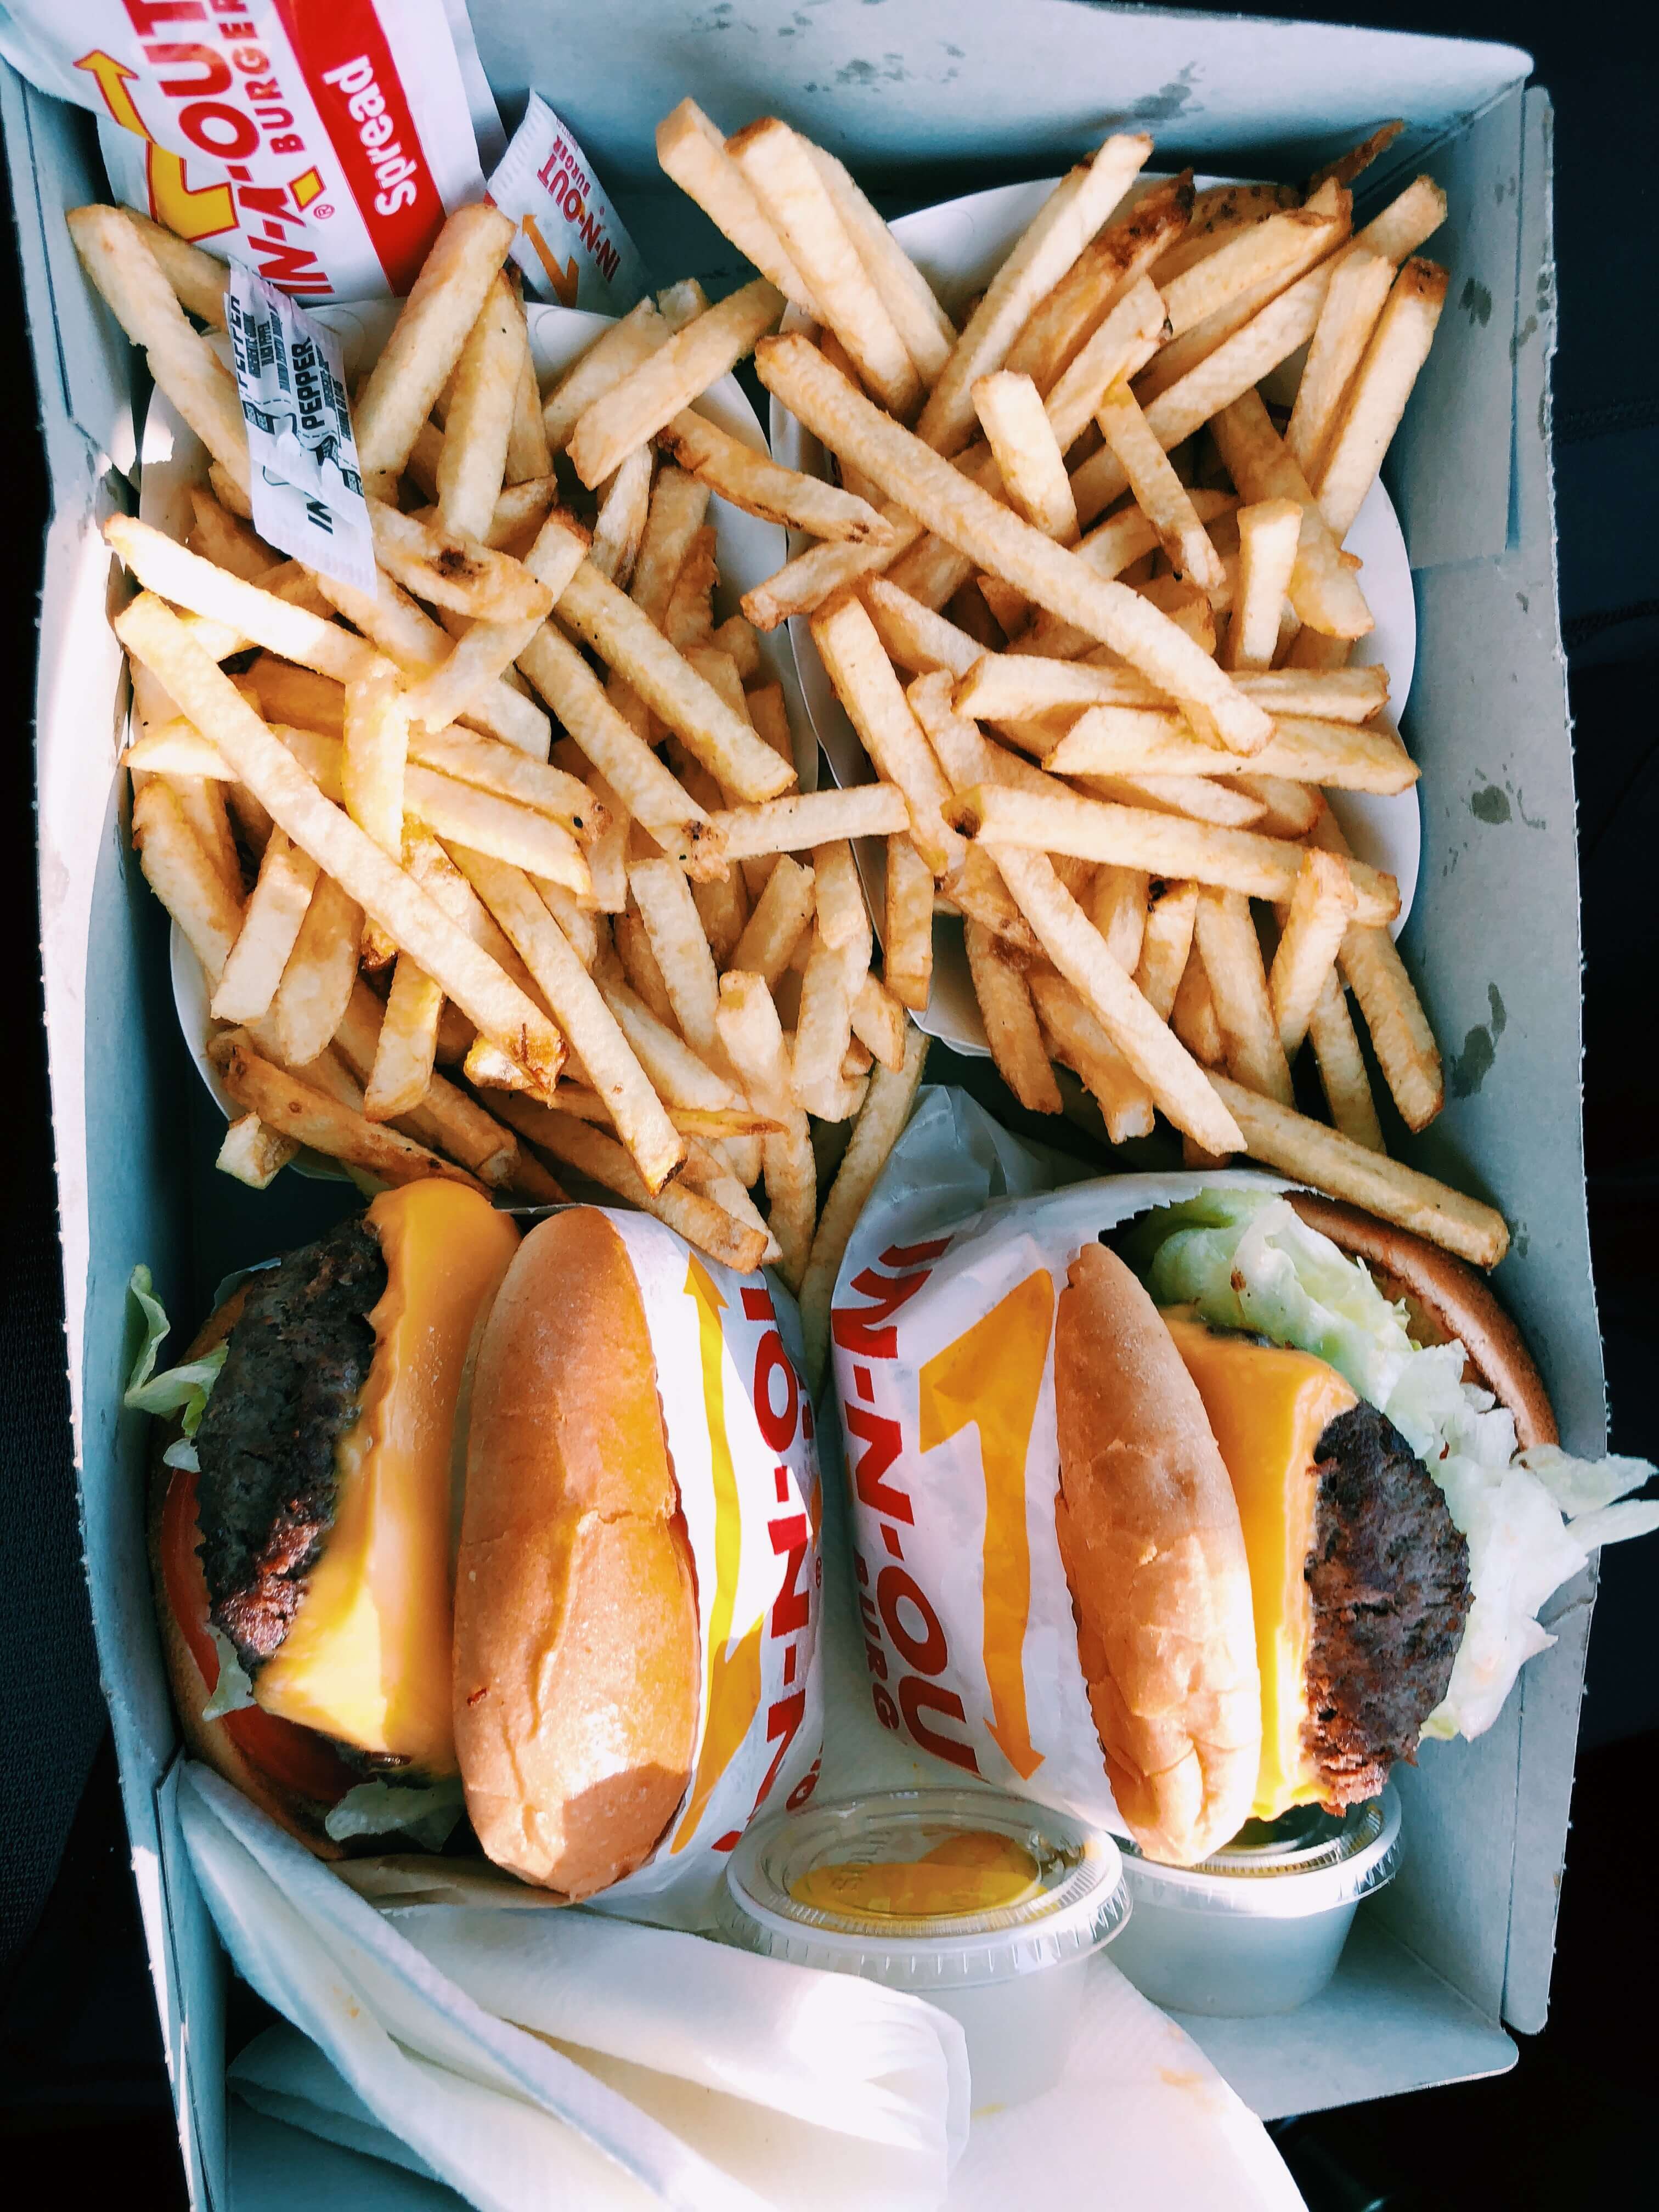 how is in n out so successful